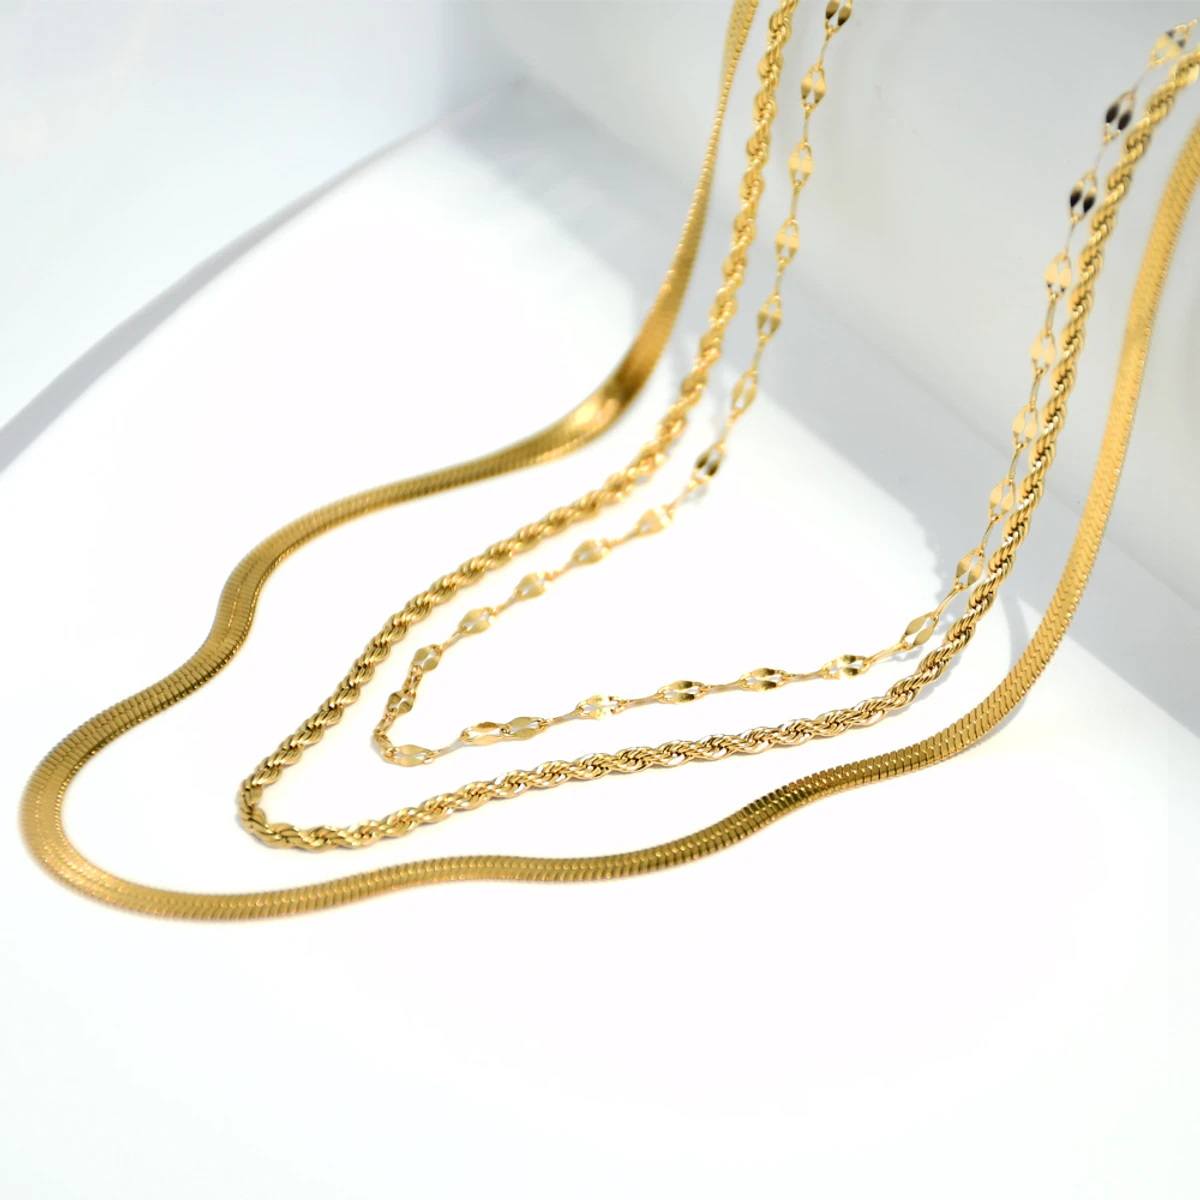 New Stylish & Fancy Exclusive Gold Rofe Chain & Snake Chain Necklace for Women and Girls